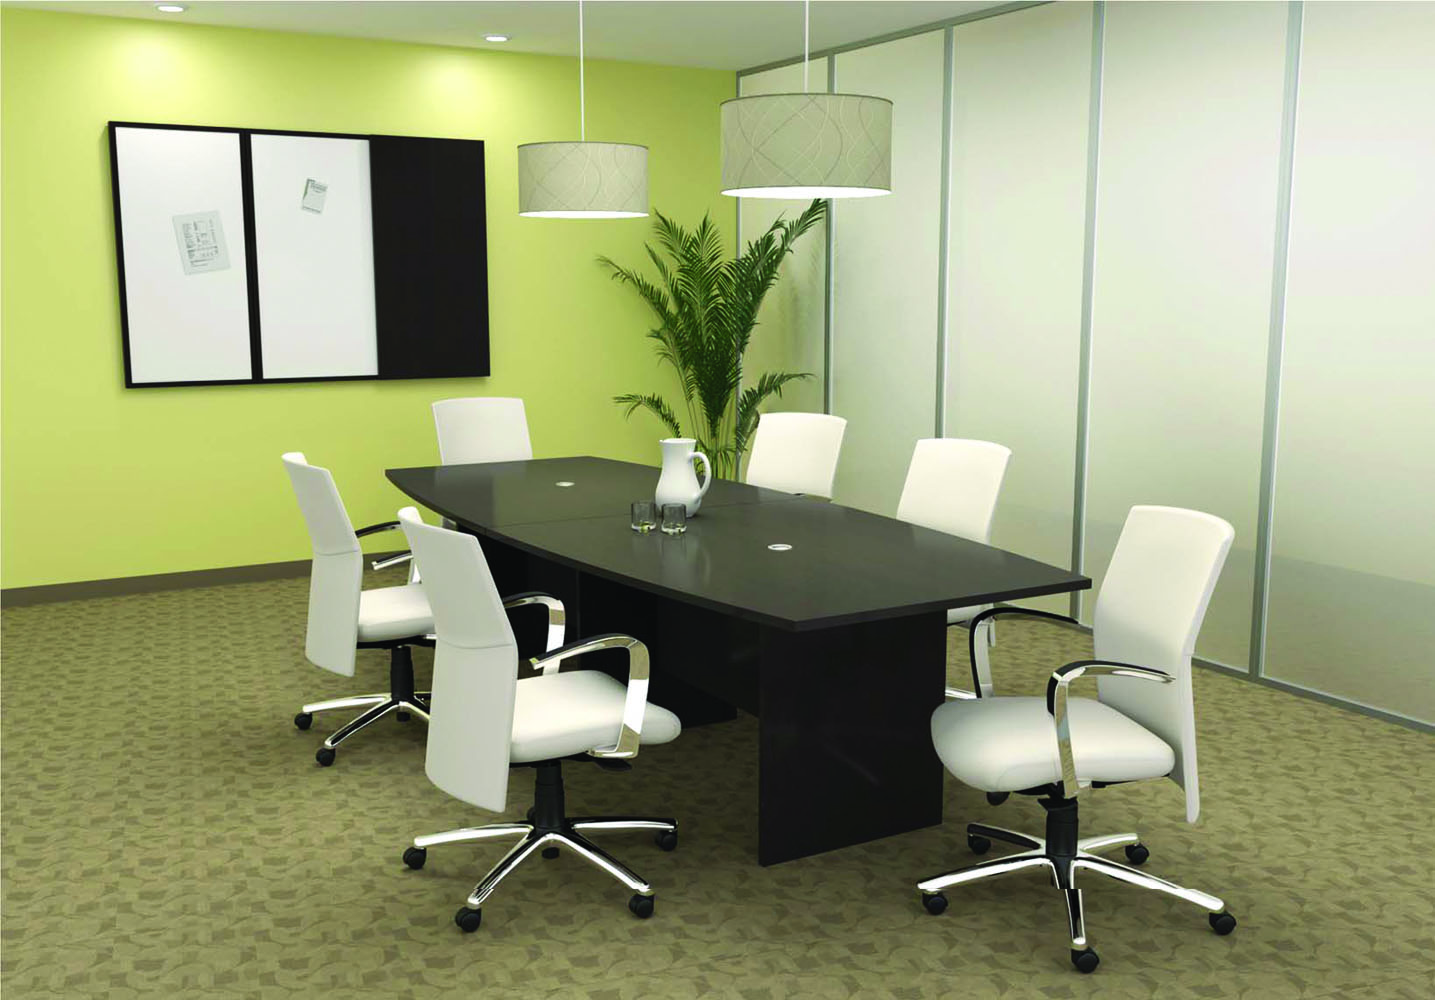 Boardroom Table And Chairs - Collaboration Spaces Office Furniture Sets